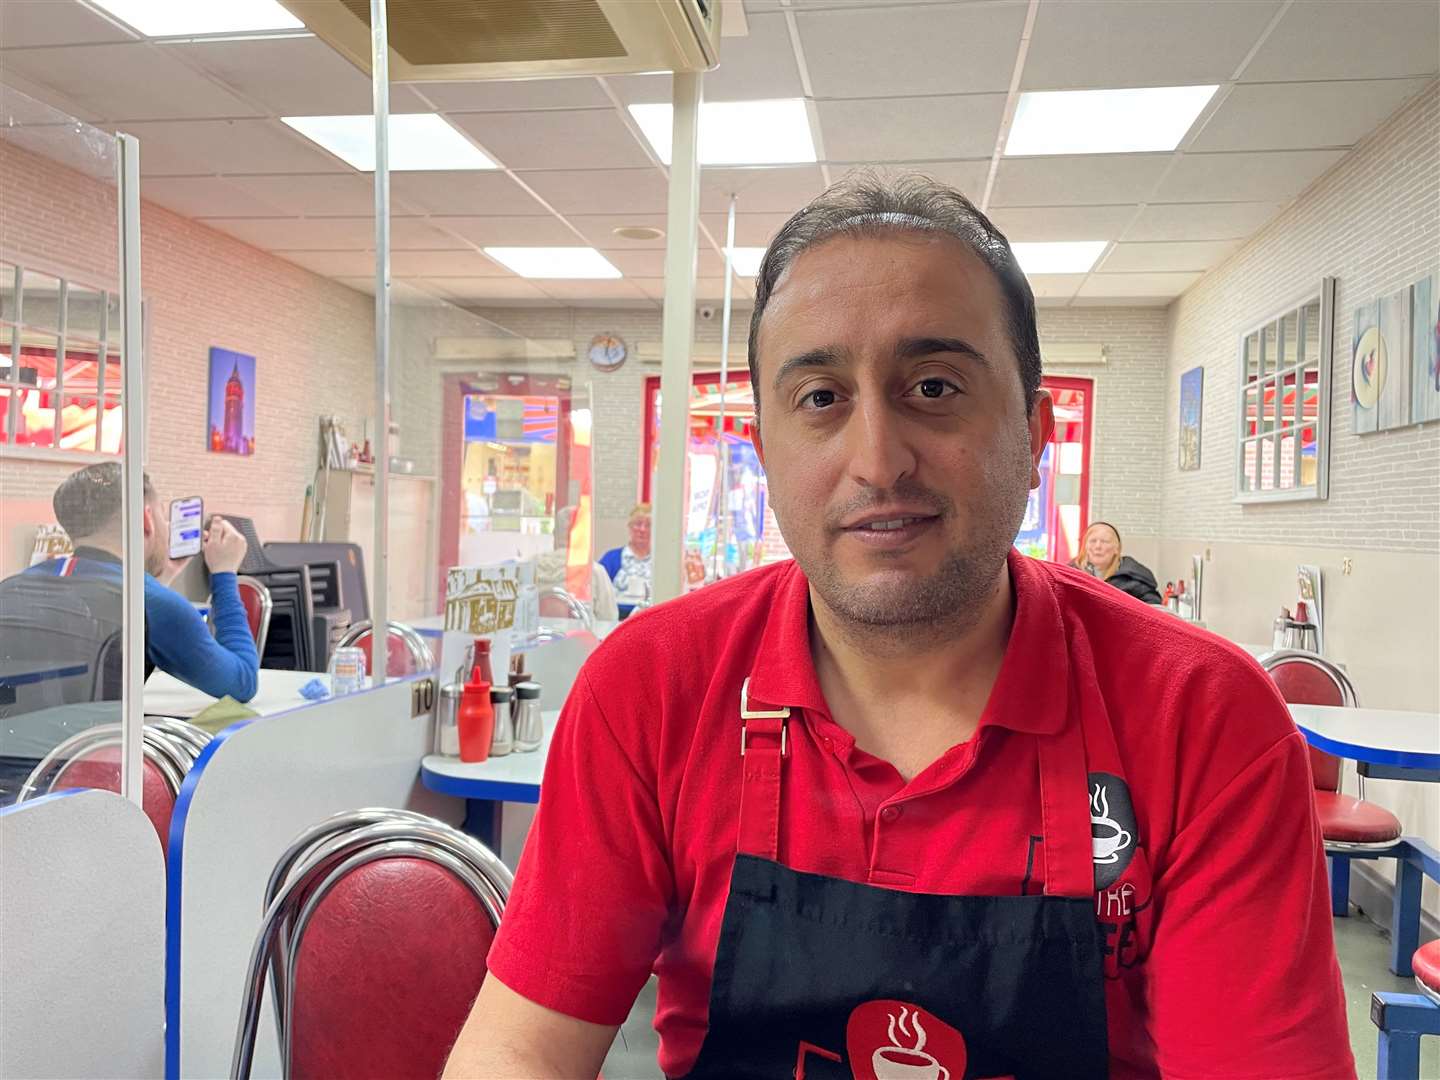 Manager of Centre Cafe Erkan Gonul said it has been quieter than usual